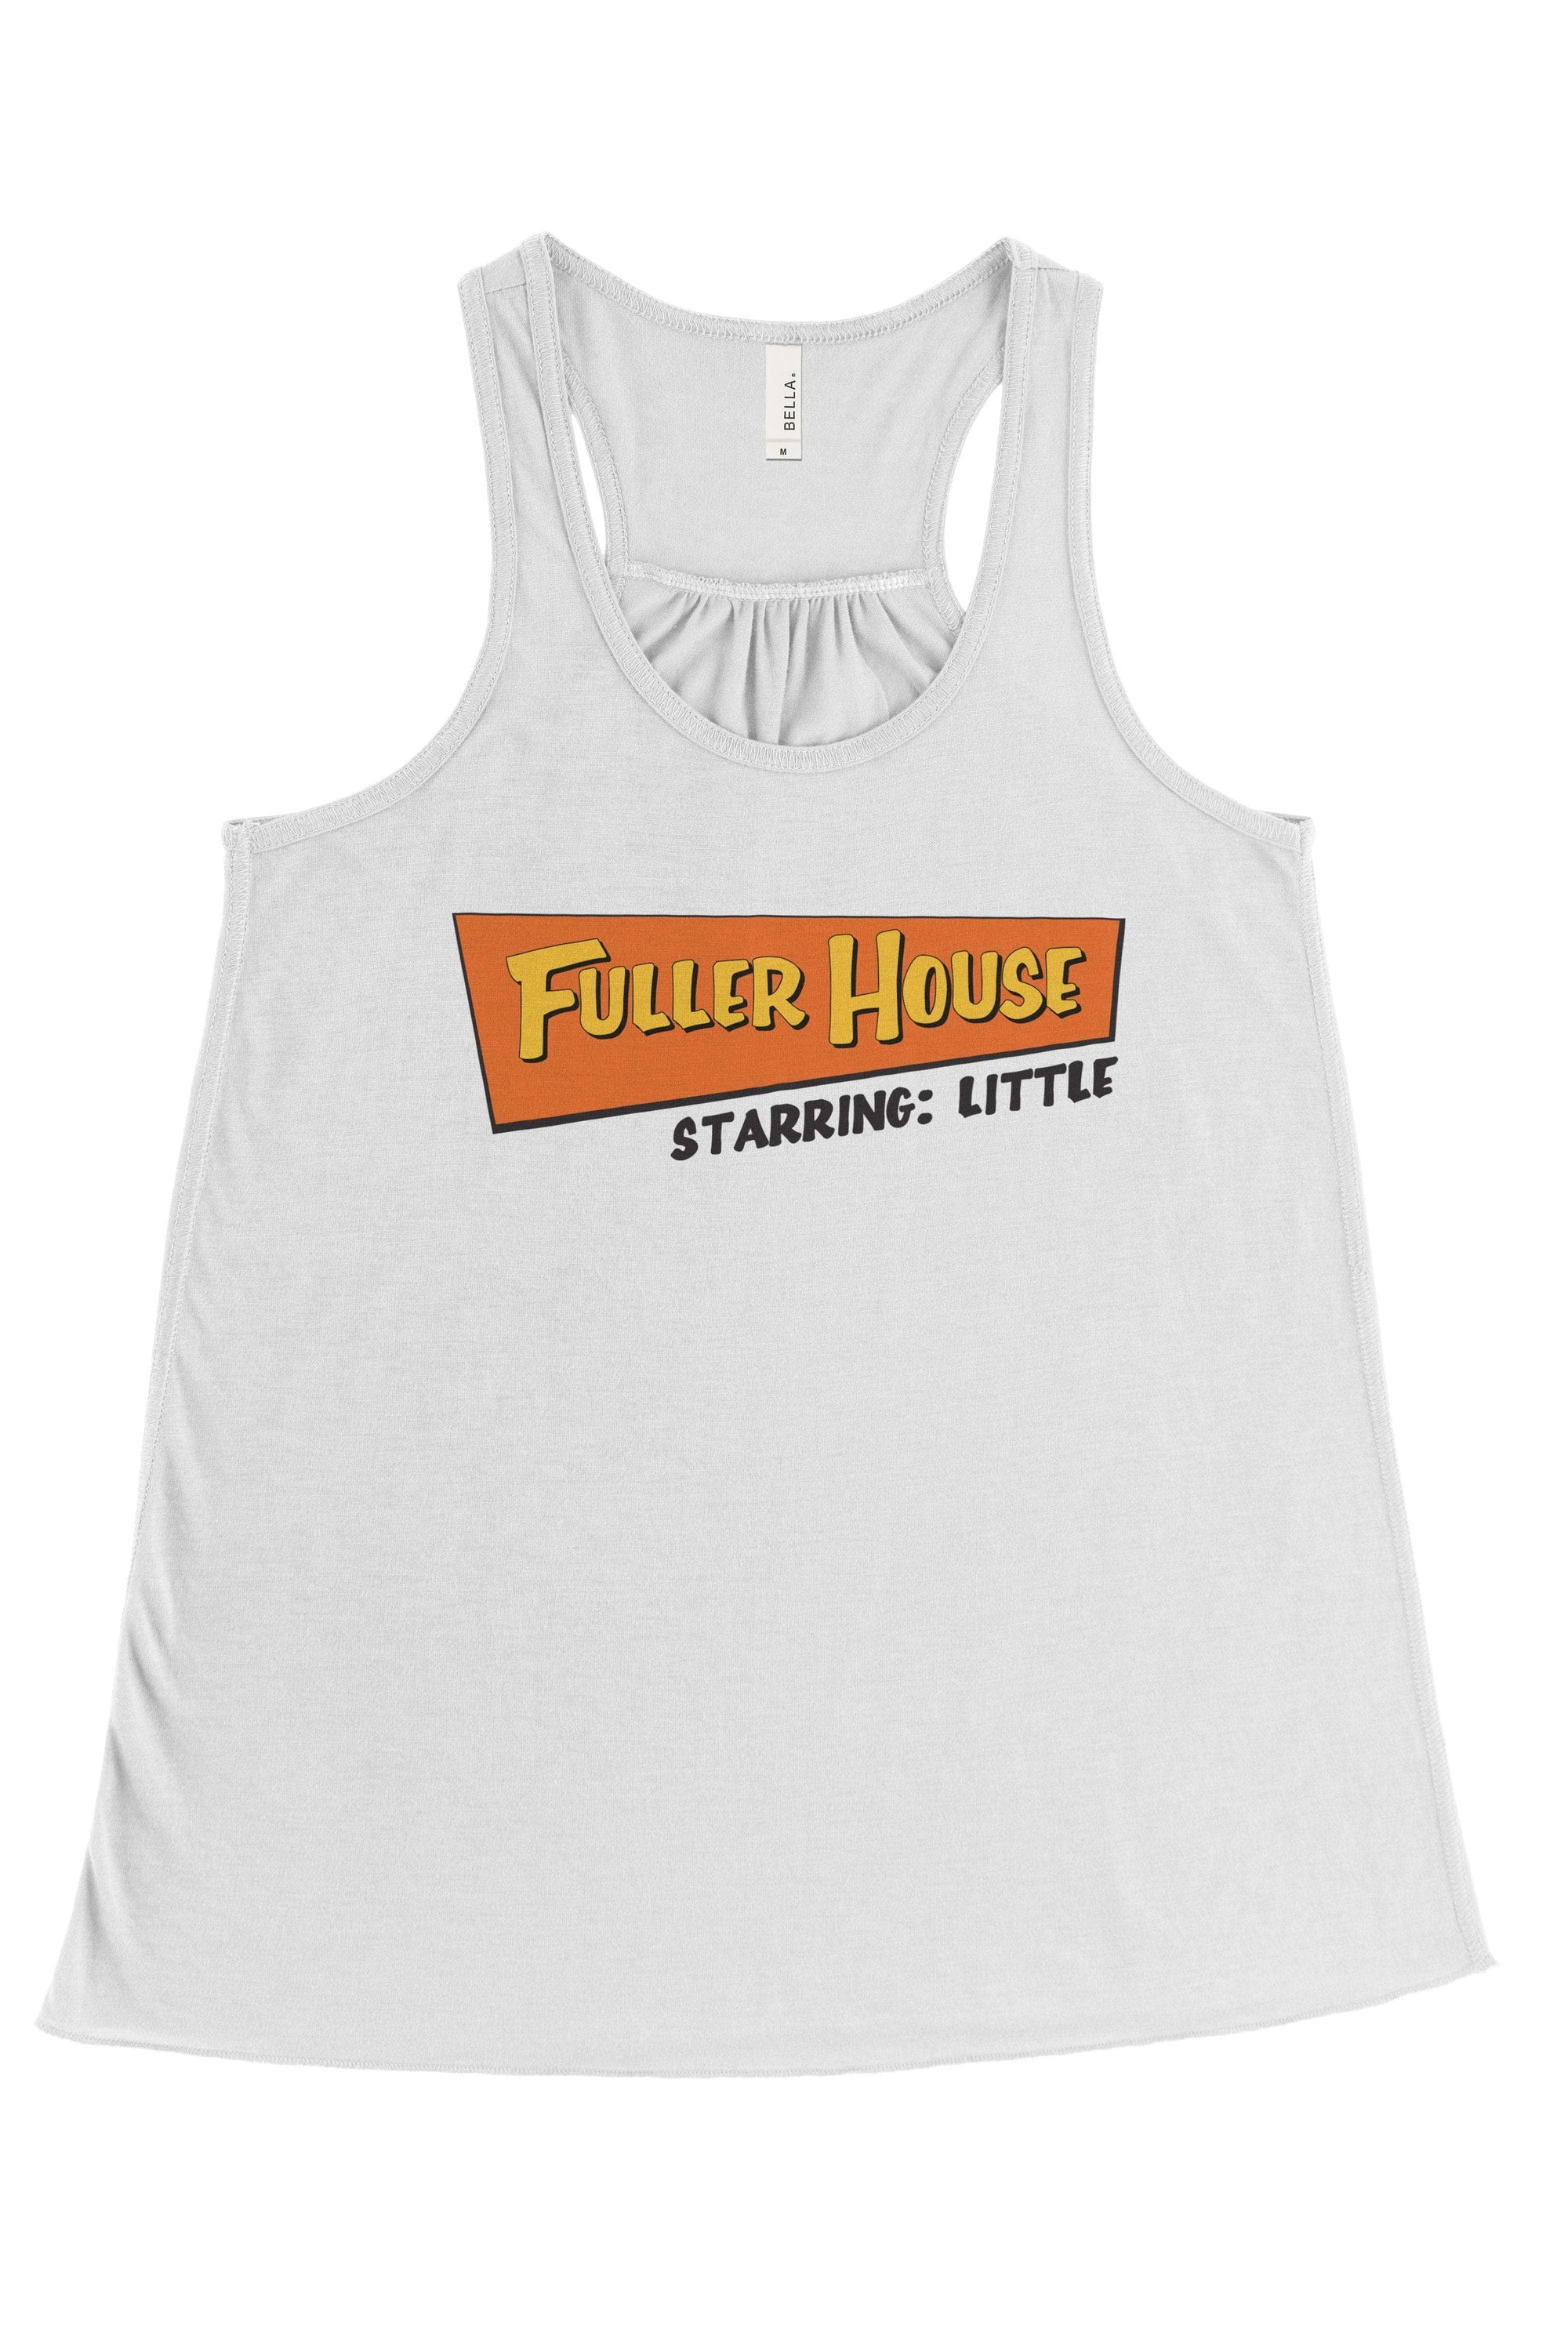 Full House Big Little Bella Canvas Flowy Racerback Tank, Ladies, Sunny and Southern, - Sunny and Southern,